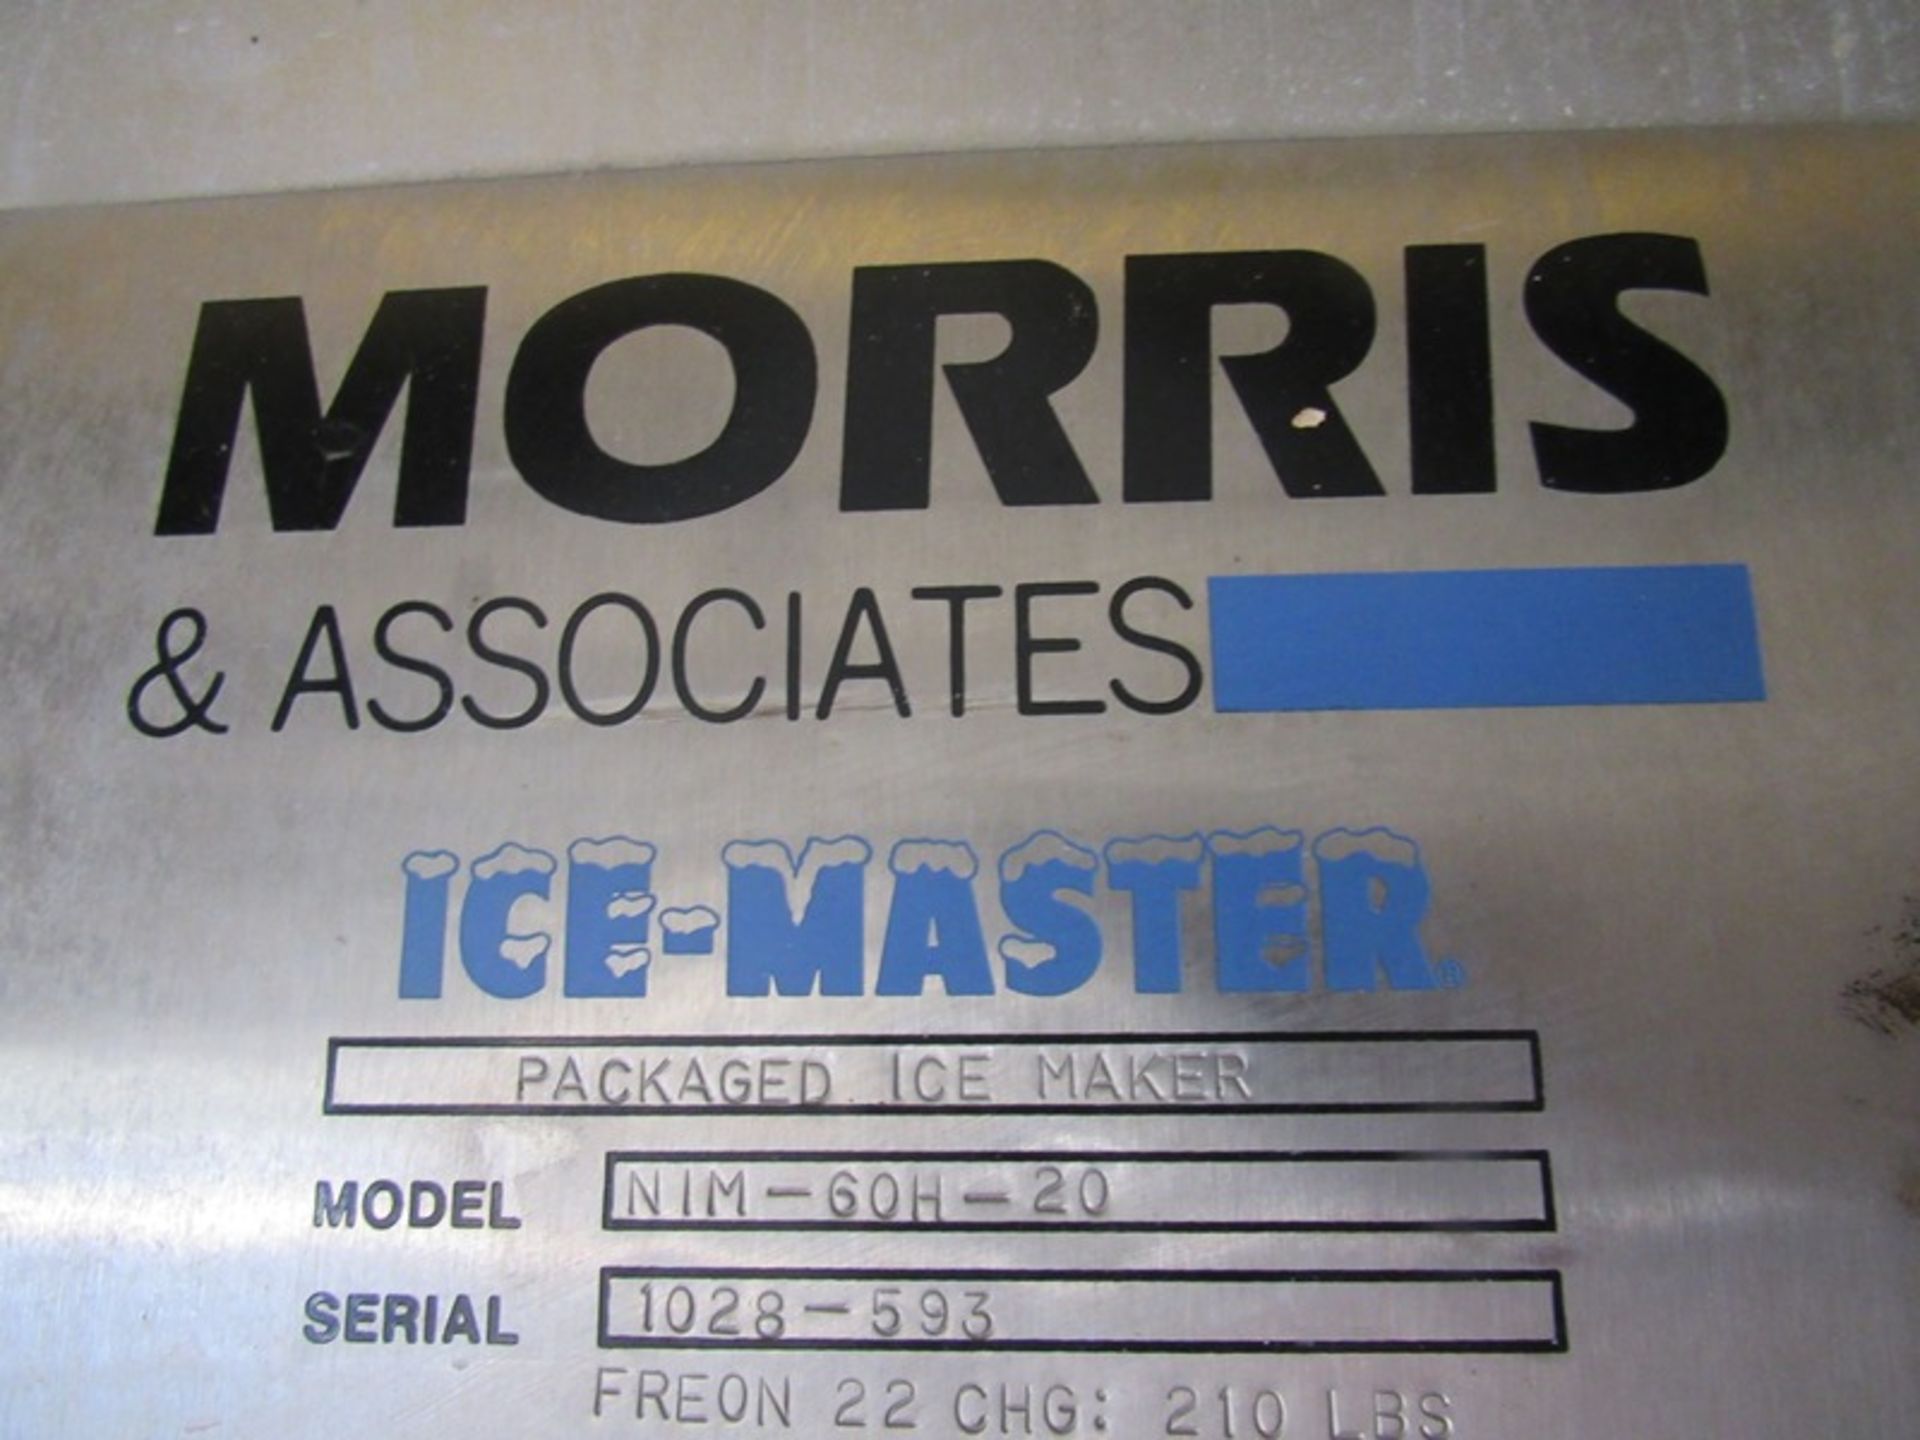 Morris Mdl. NIM60H-20 Packaged Ice Maker, Ser. #1028-593 ( (CAN BE REMOVED BY REMOVING A WALL COST - Image 6 of 6